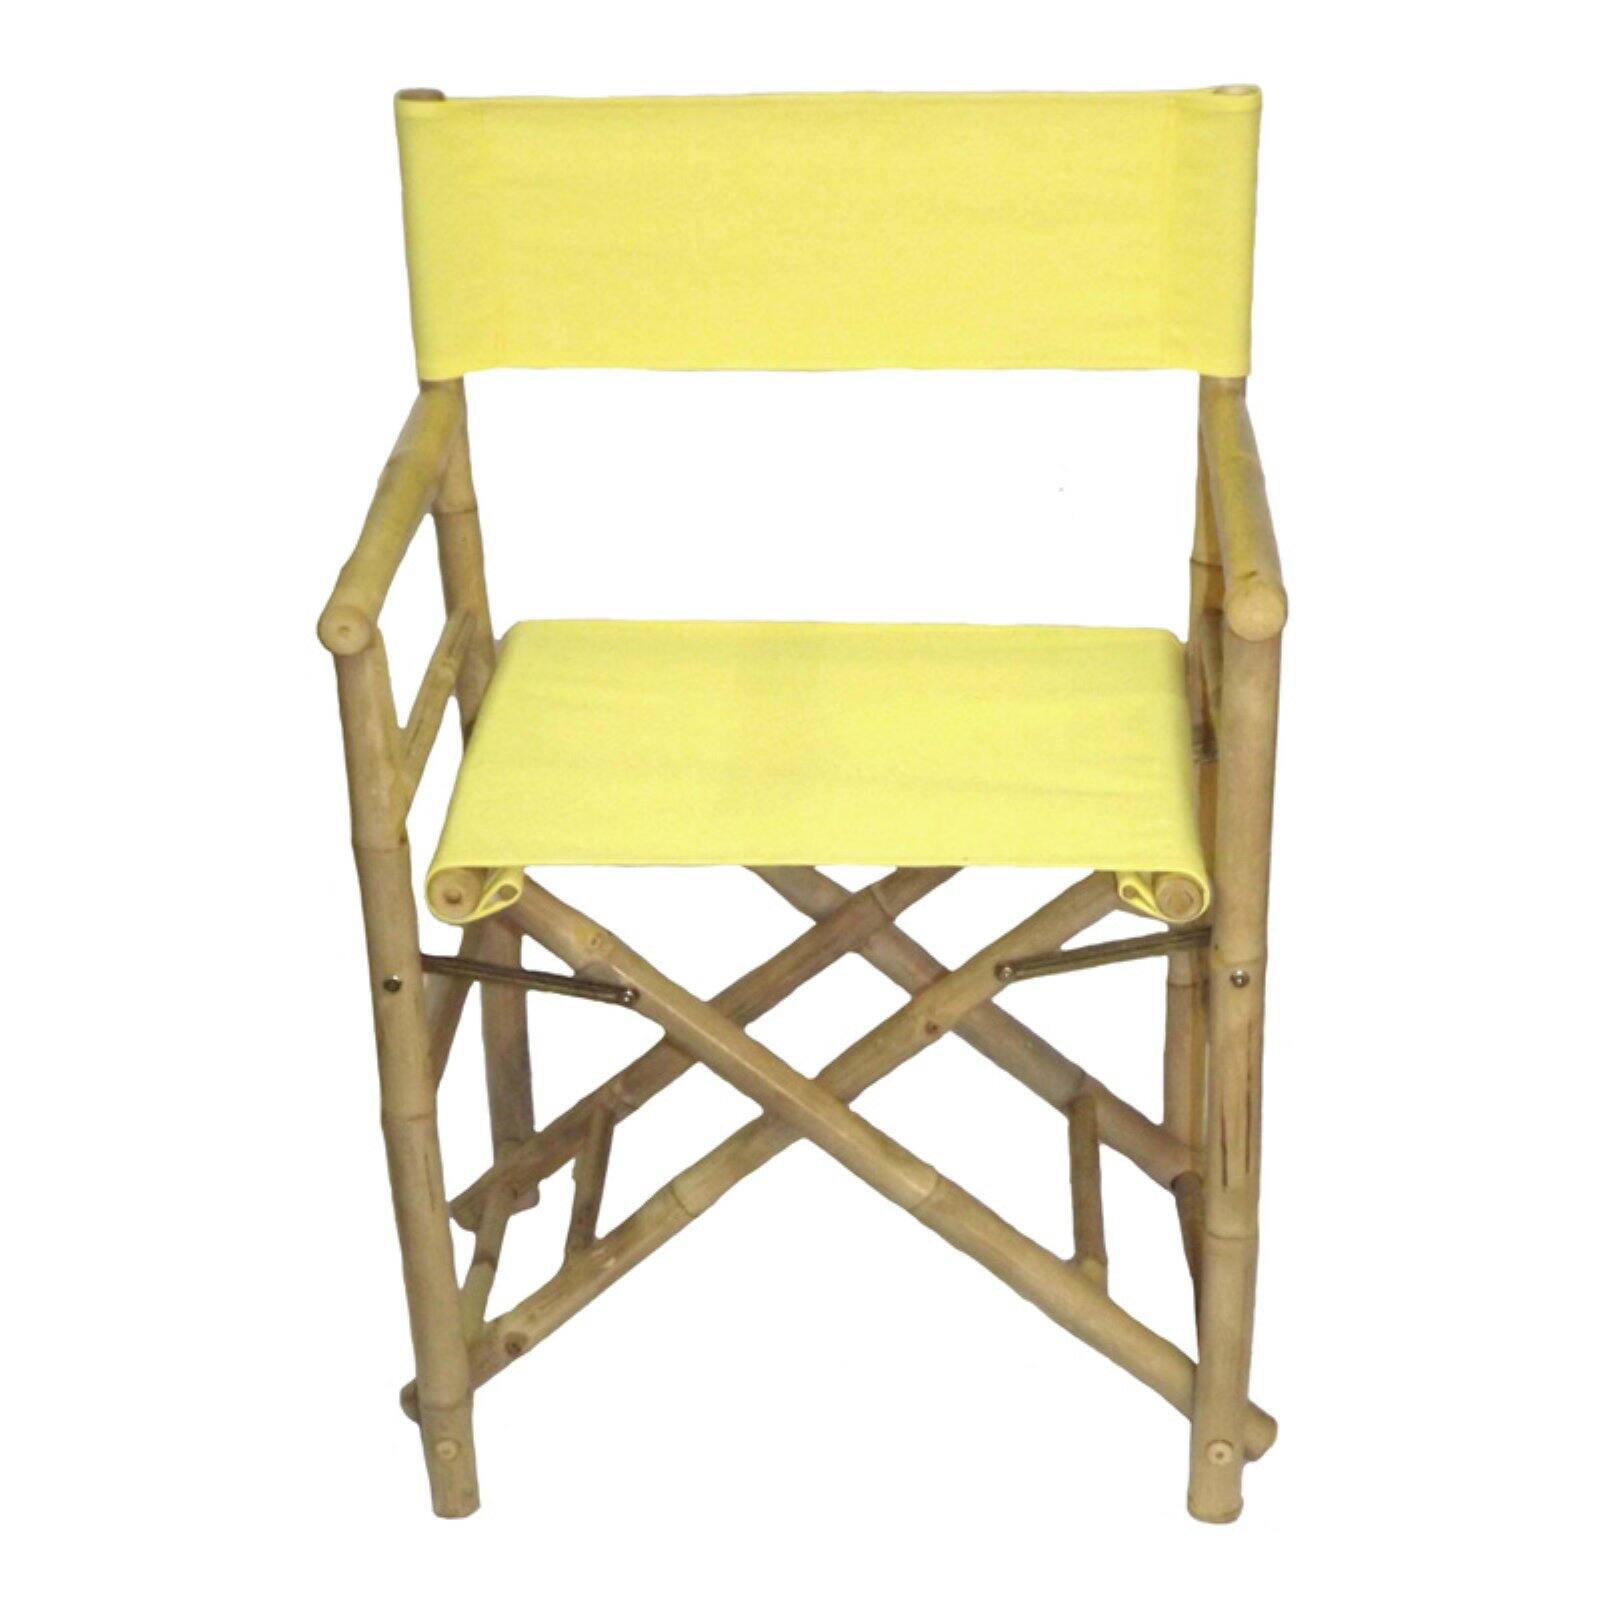 Bamboo54 Folding Bamboo Low Directors Chair with Canvas Cover - Set of 2 - image 1 of 5